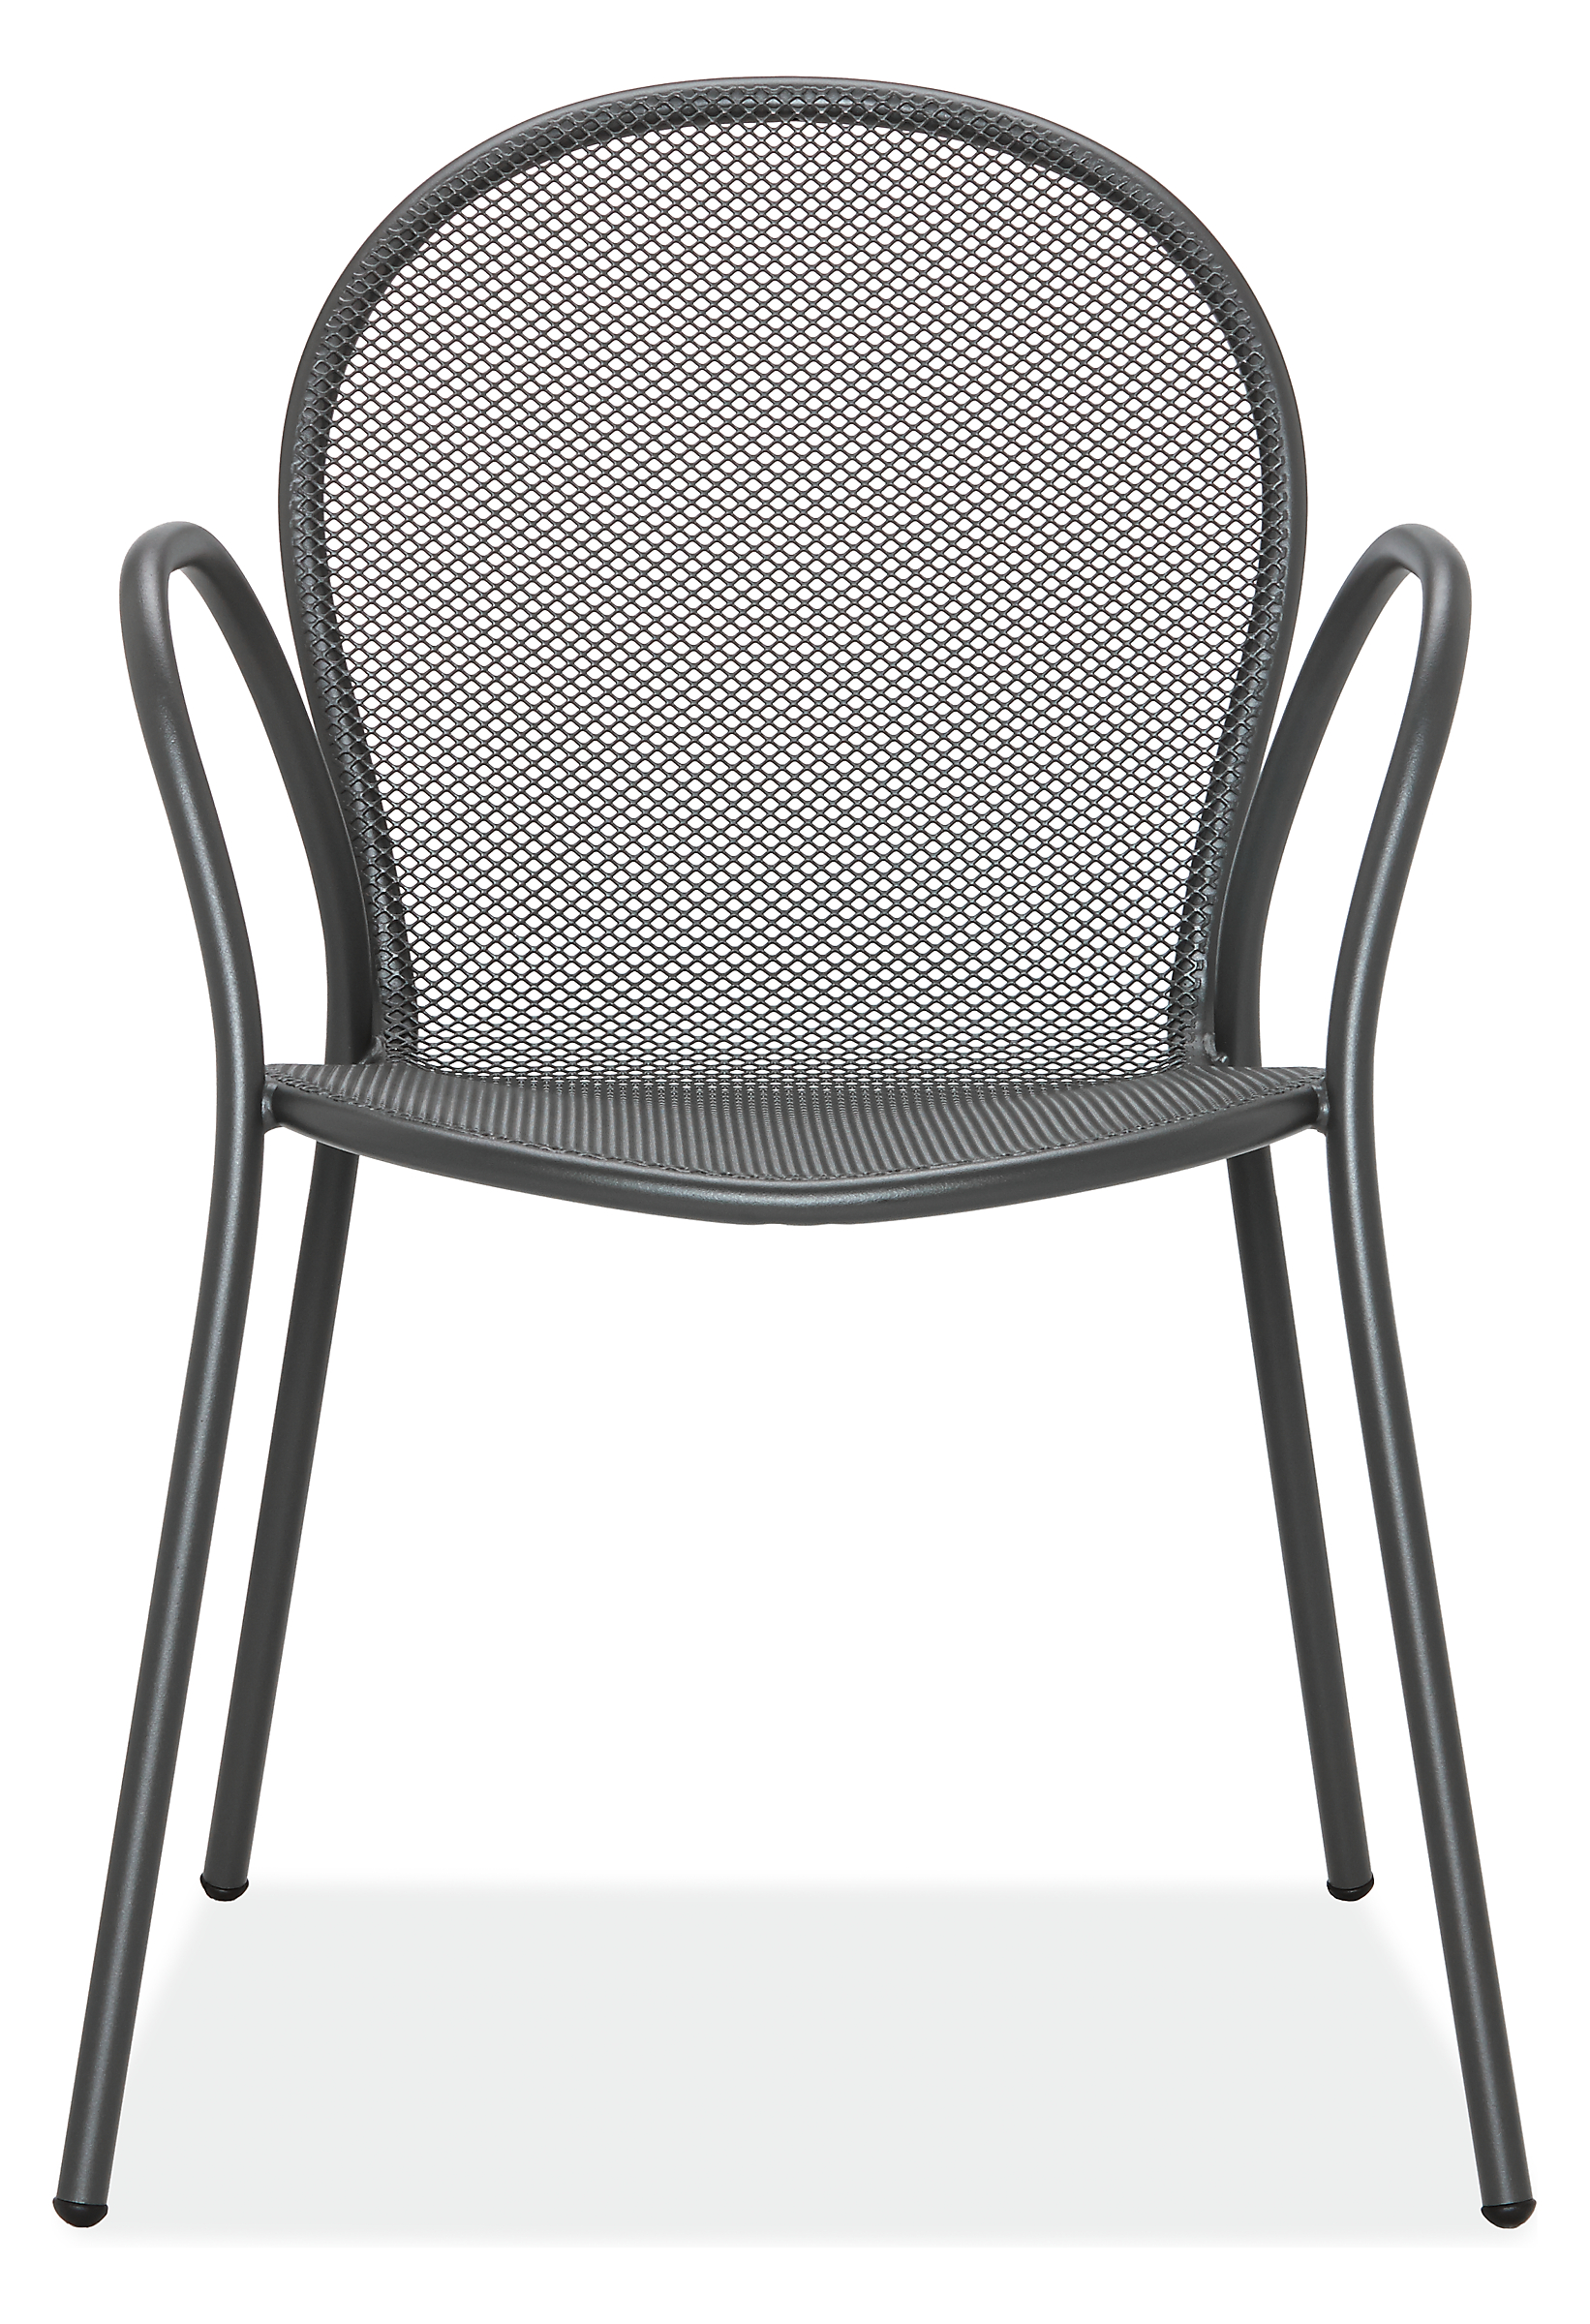 Front view of Rio Chair in Graphite.